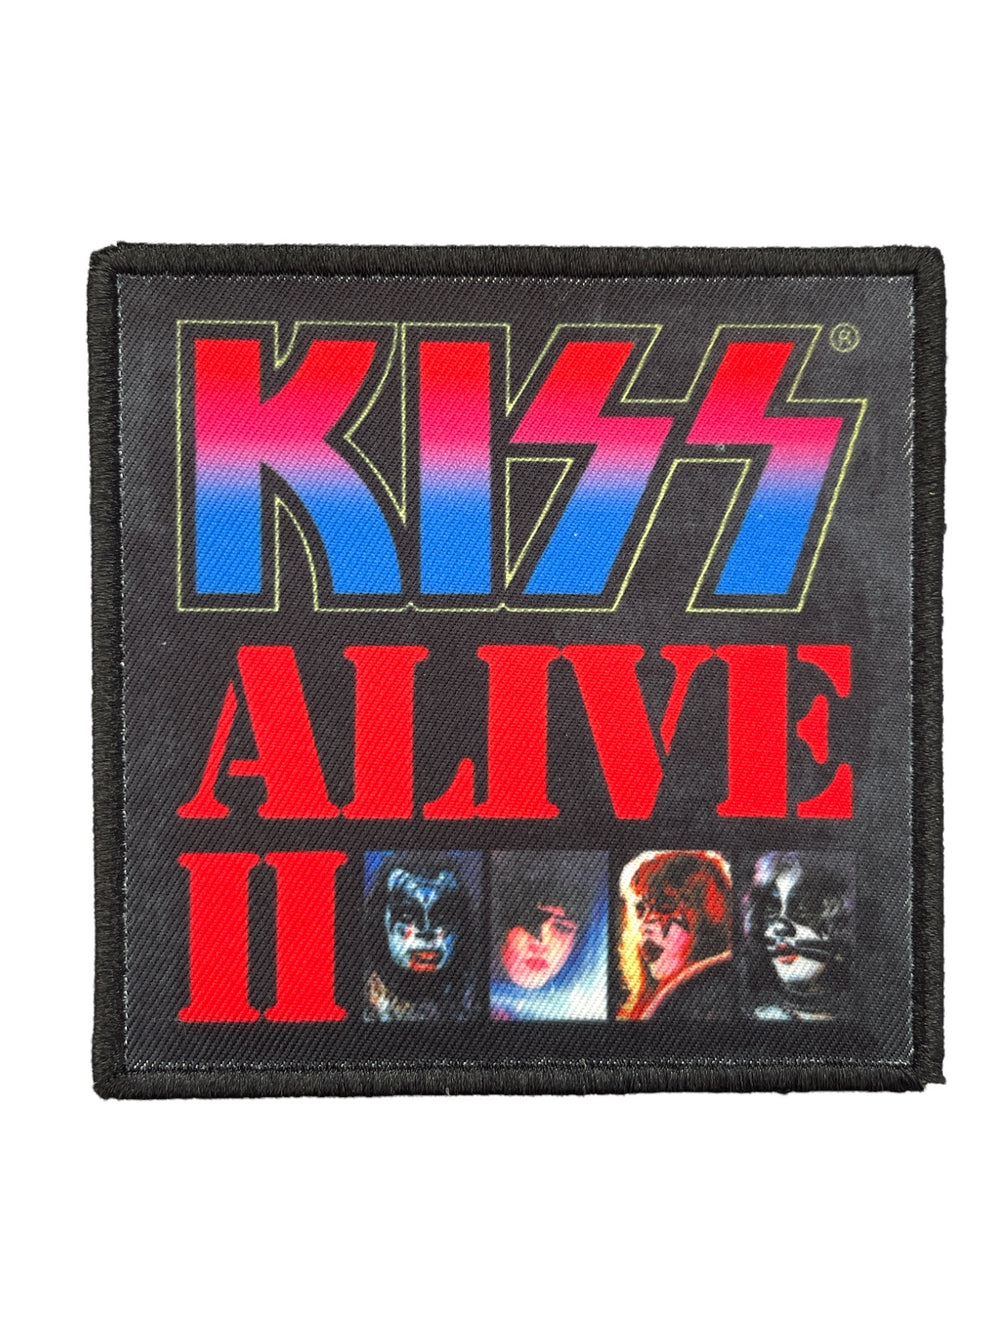 KISS ALIVE 11 Official Woven Patch Brand New